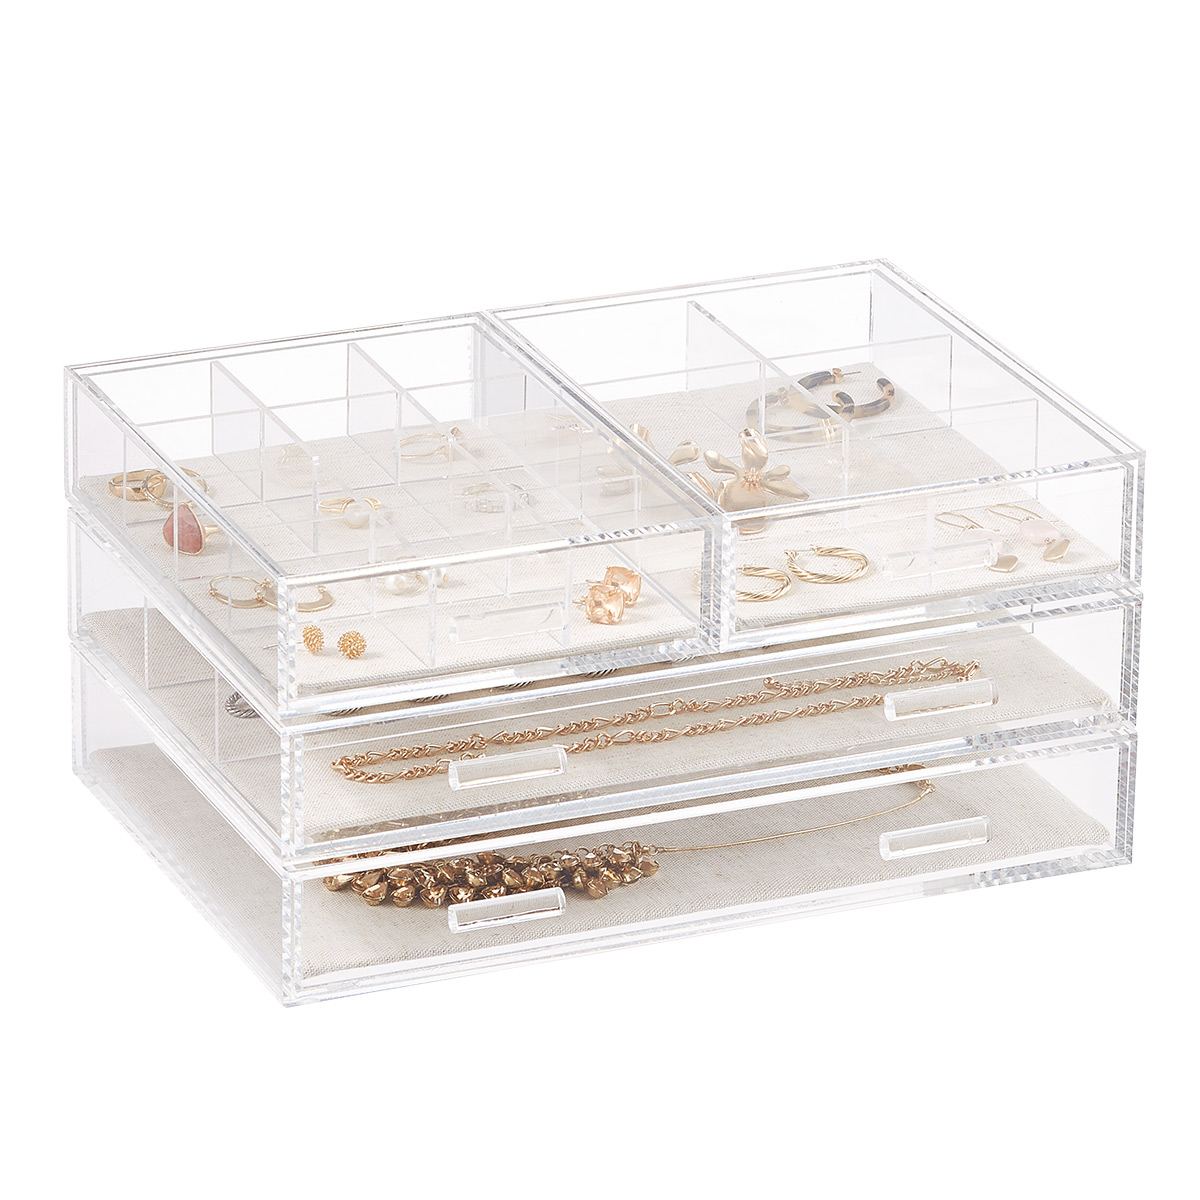 https://www.containerstore.com/catalogimages/392858/10081574g-acrylic-jewelry-drawer.jpg